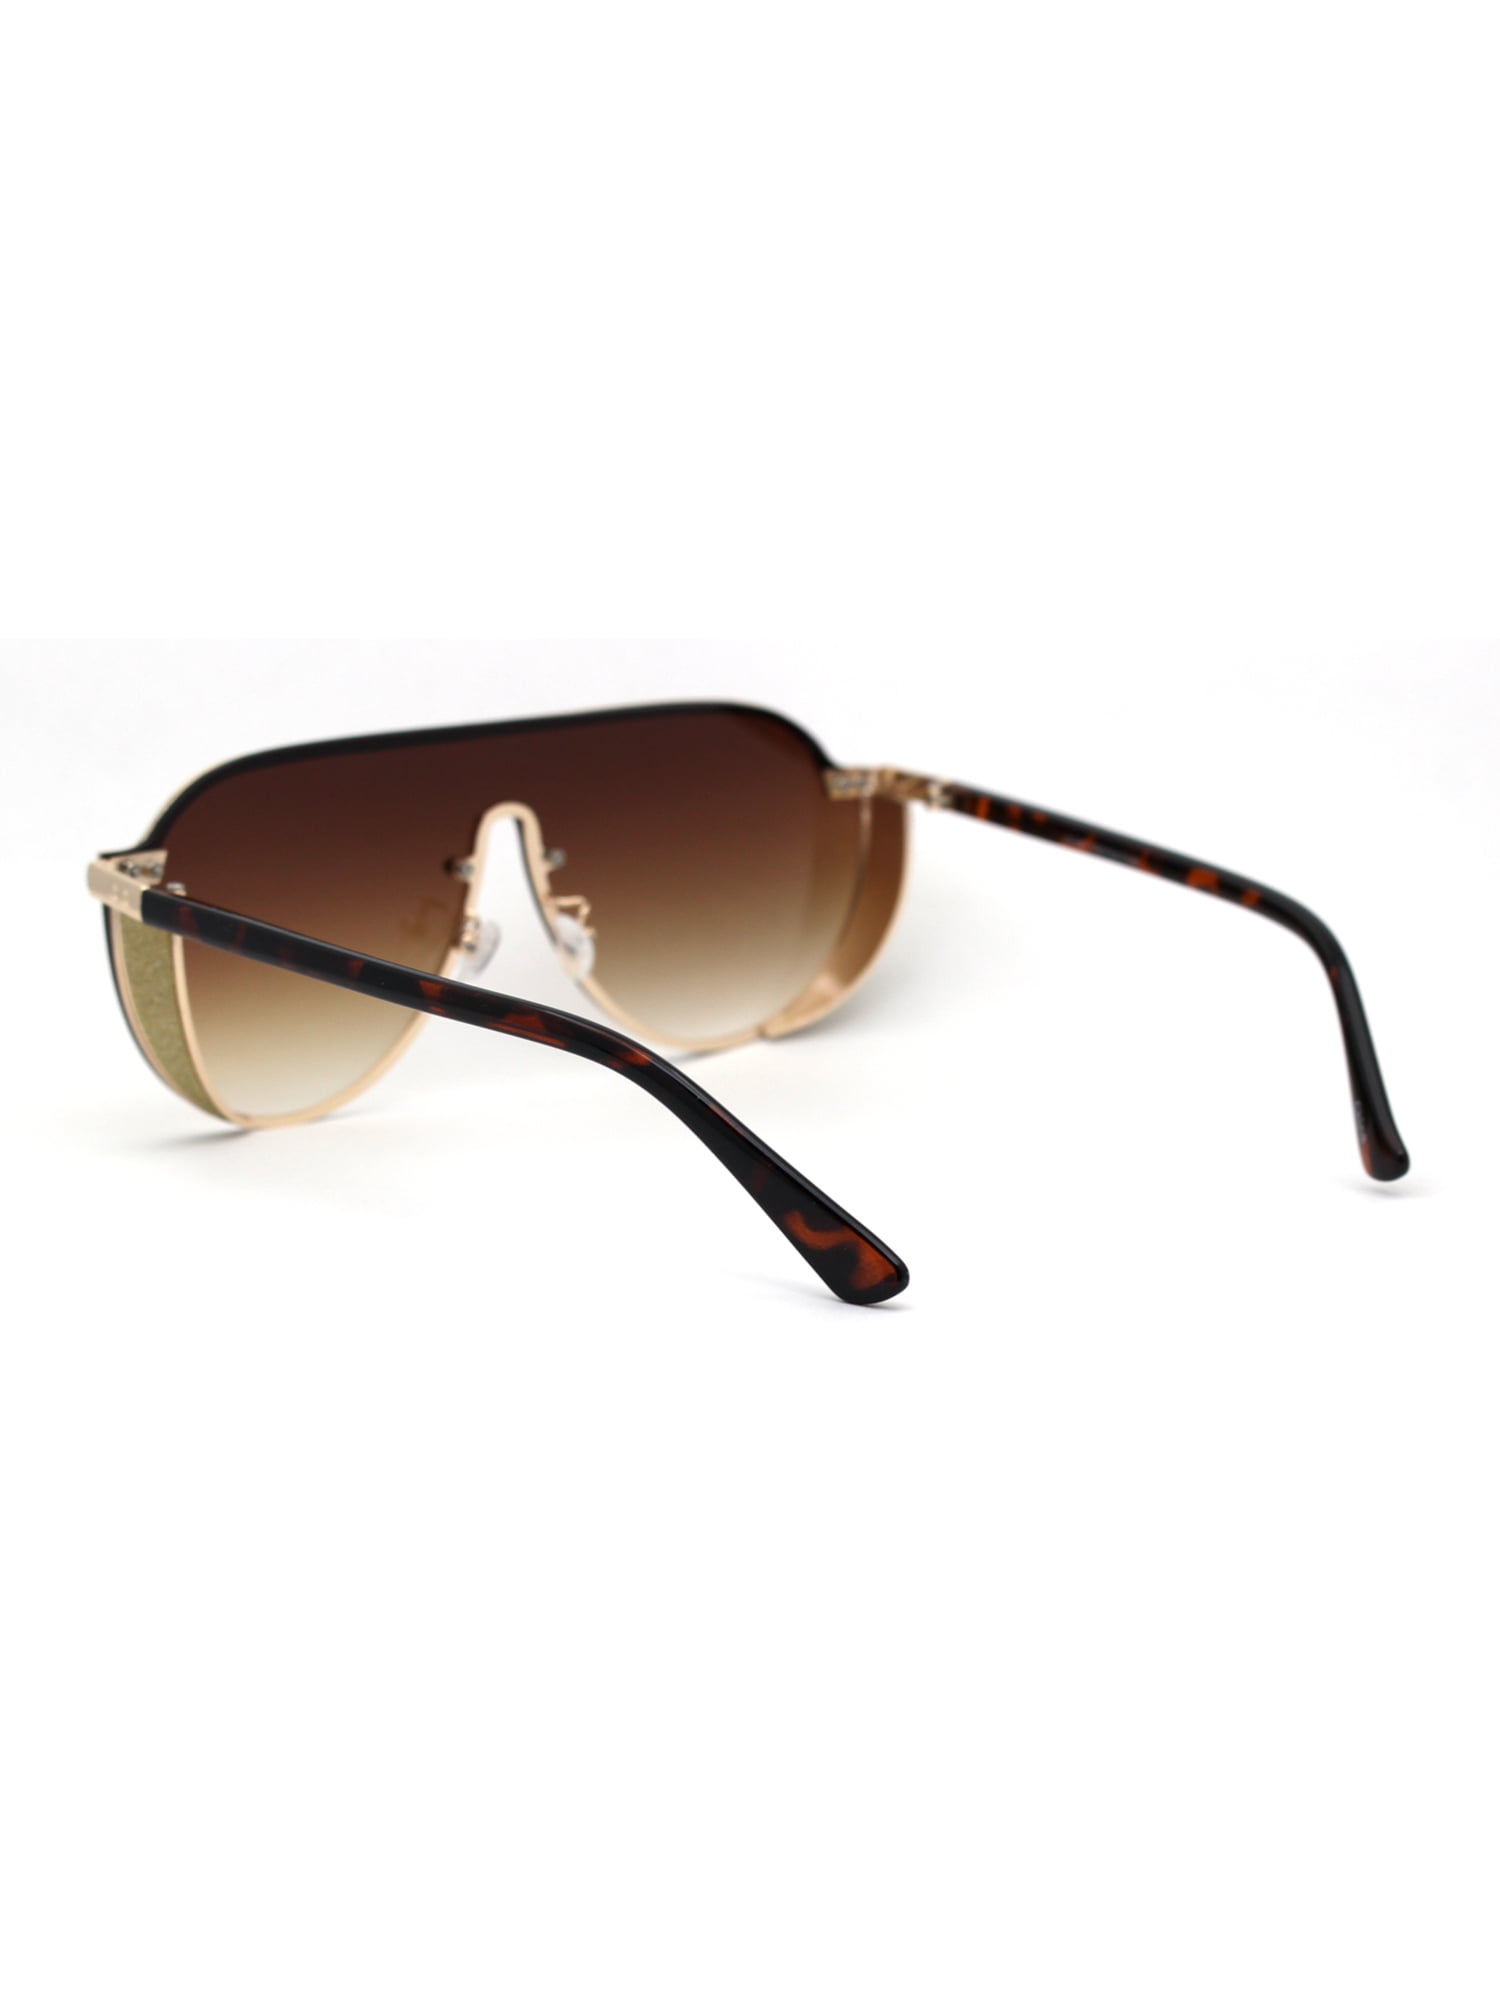 Flach Top Shield Groß Racer Exposed Linse Metall Sonnenbrille 